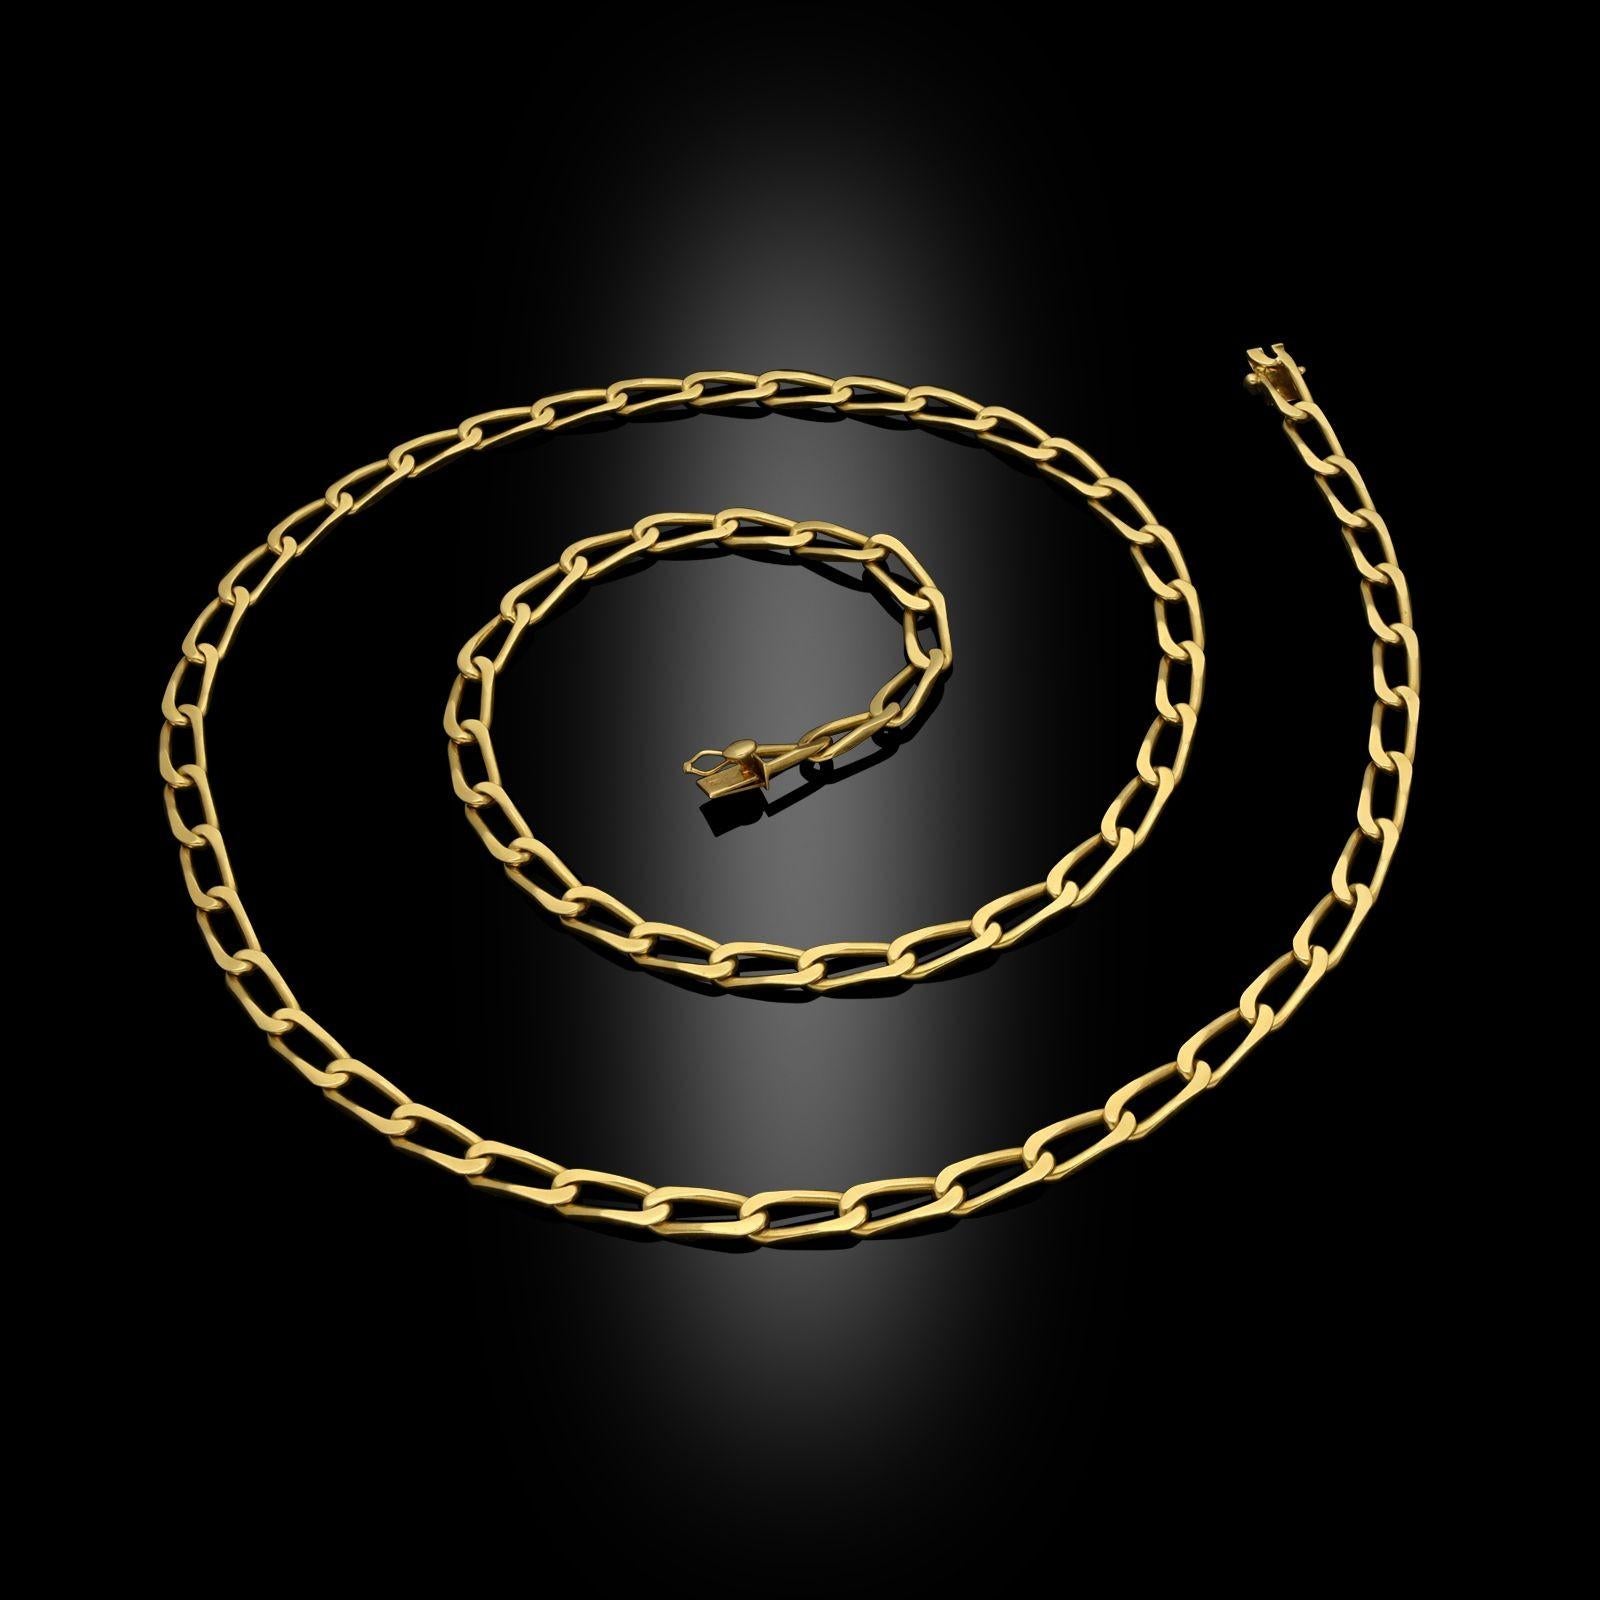 18ct yellow gold 'Paperclip' long chain necklace by Cartier, 1977. The chain is formed of uniform stylised oval links, with a tongue and box clasp fastening.
Maker
Cartier
Period
1977
Origin
London
Setting
18ct yellow gold, signed Cartier with